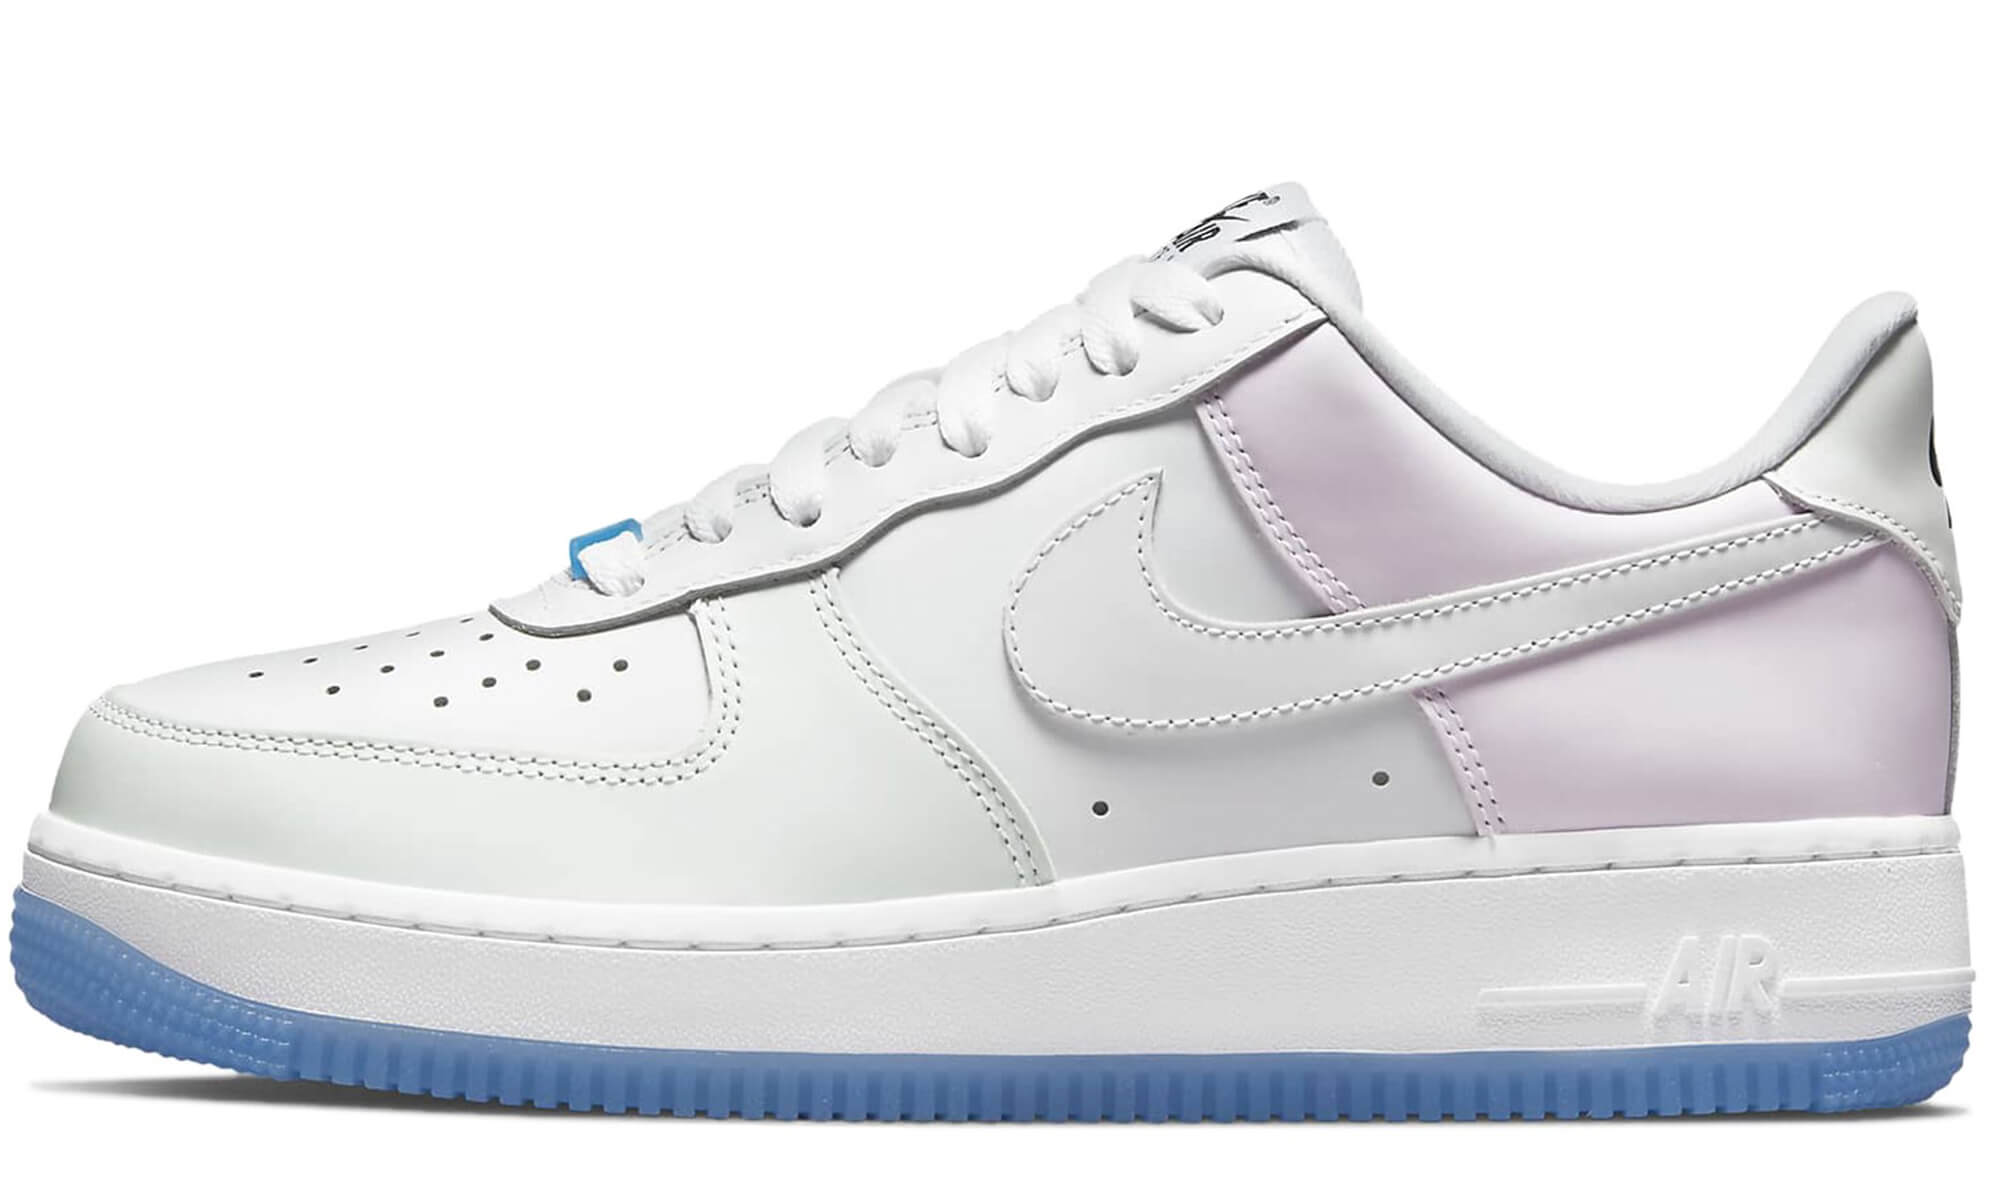 Nike Air Force 1 UV color changing shoes